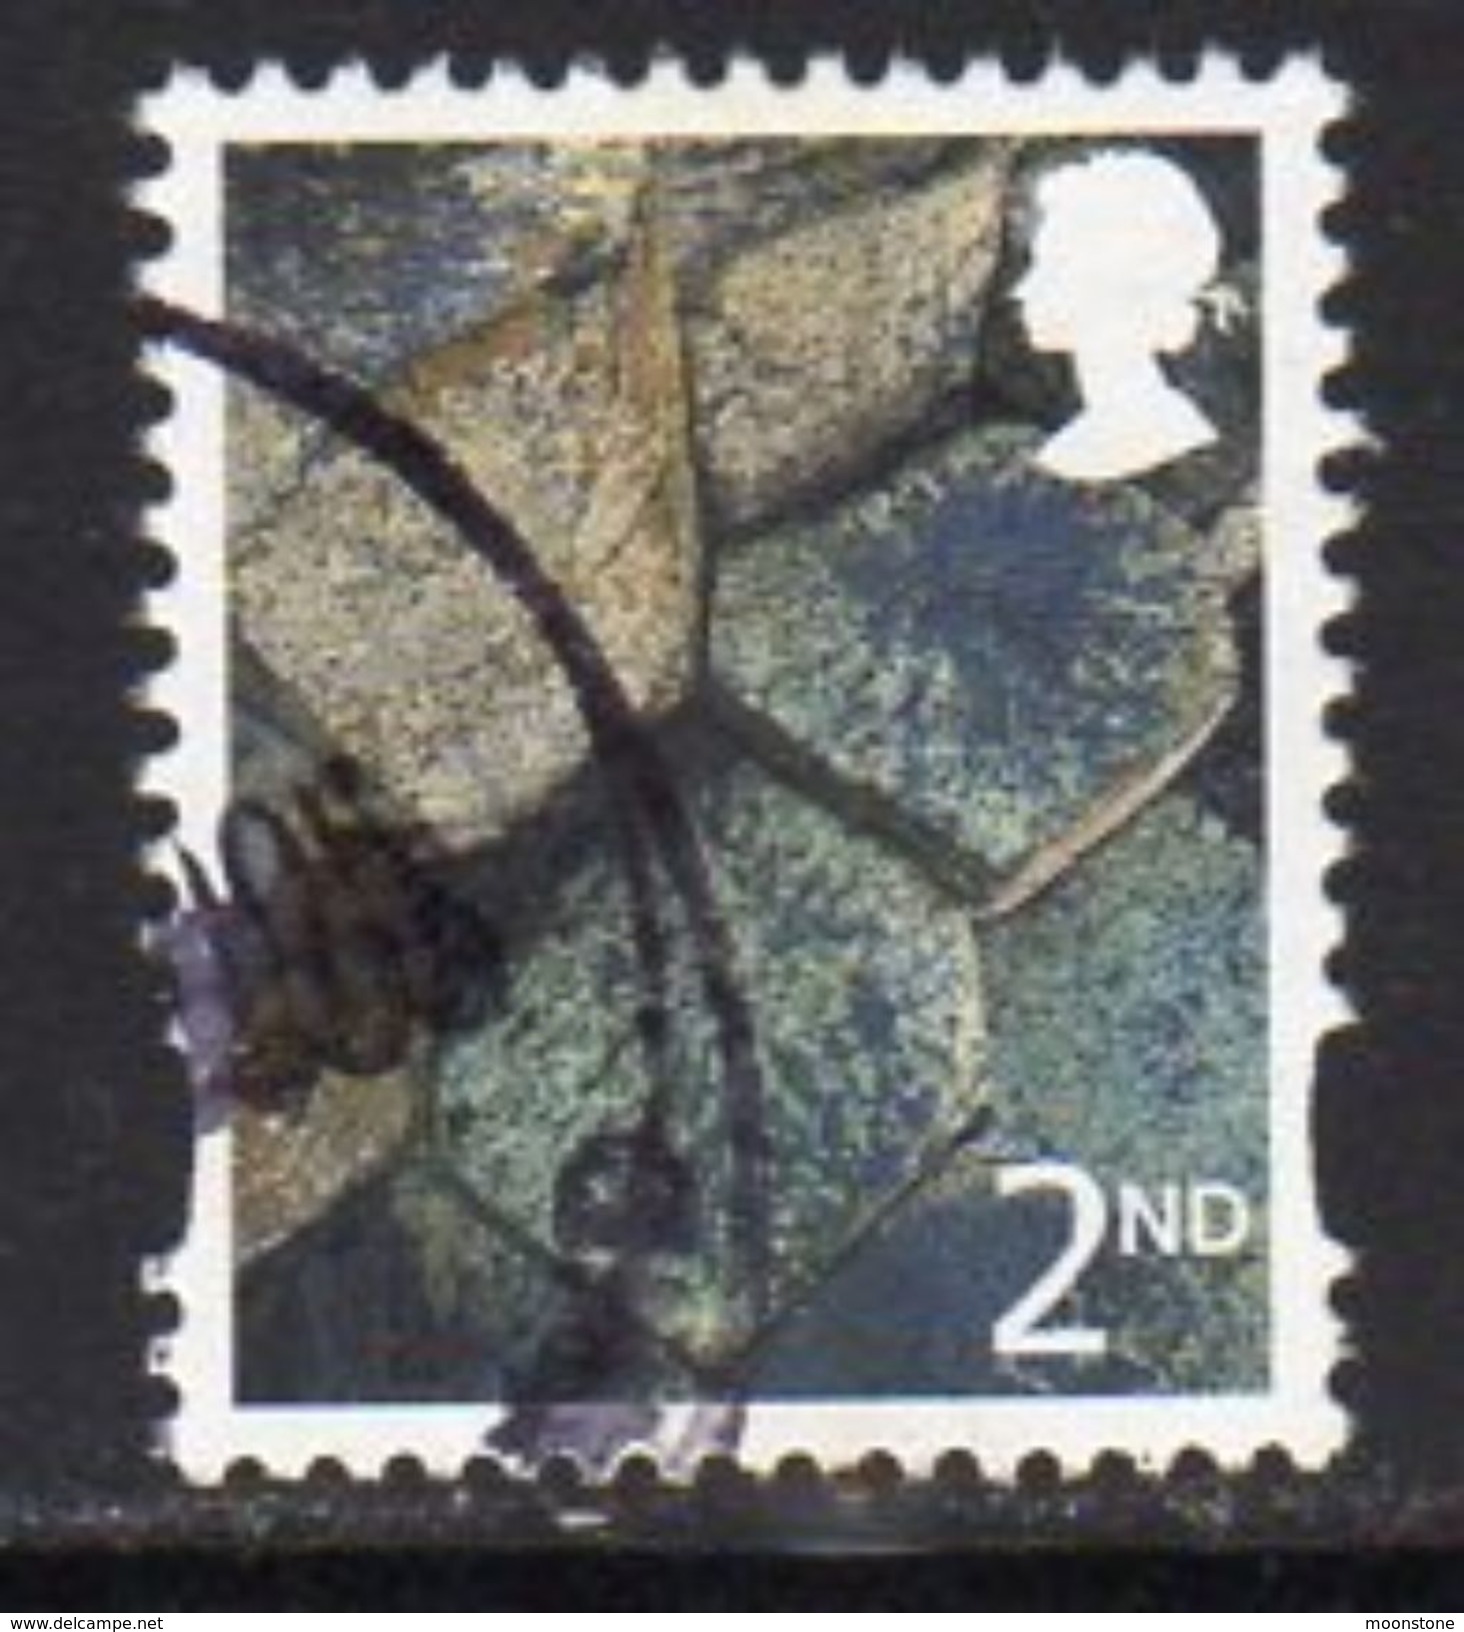 GB N. Ireland 2003-17 2nd Class With Border Regional Country, Used, SG 94 - Irlanda Del Nord